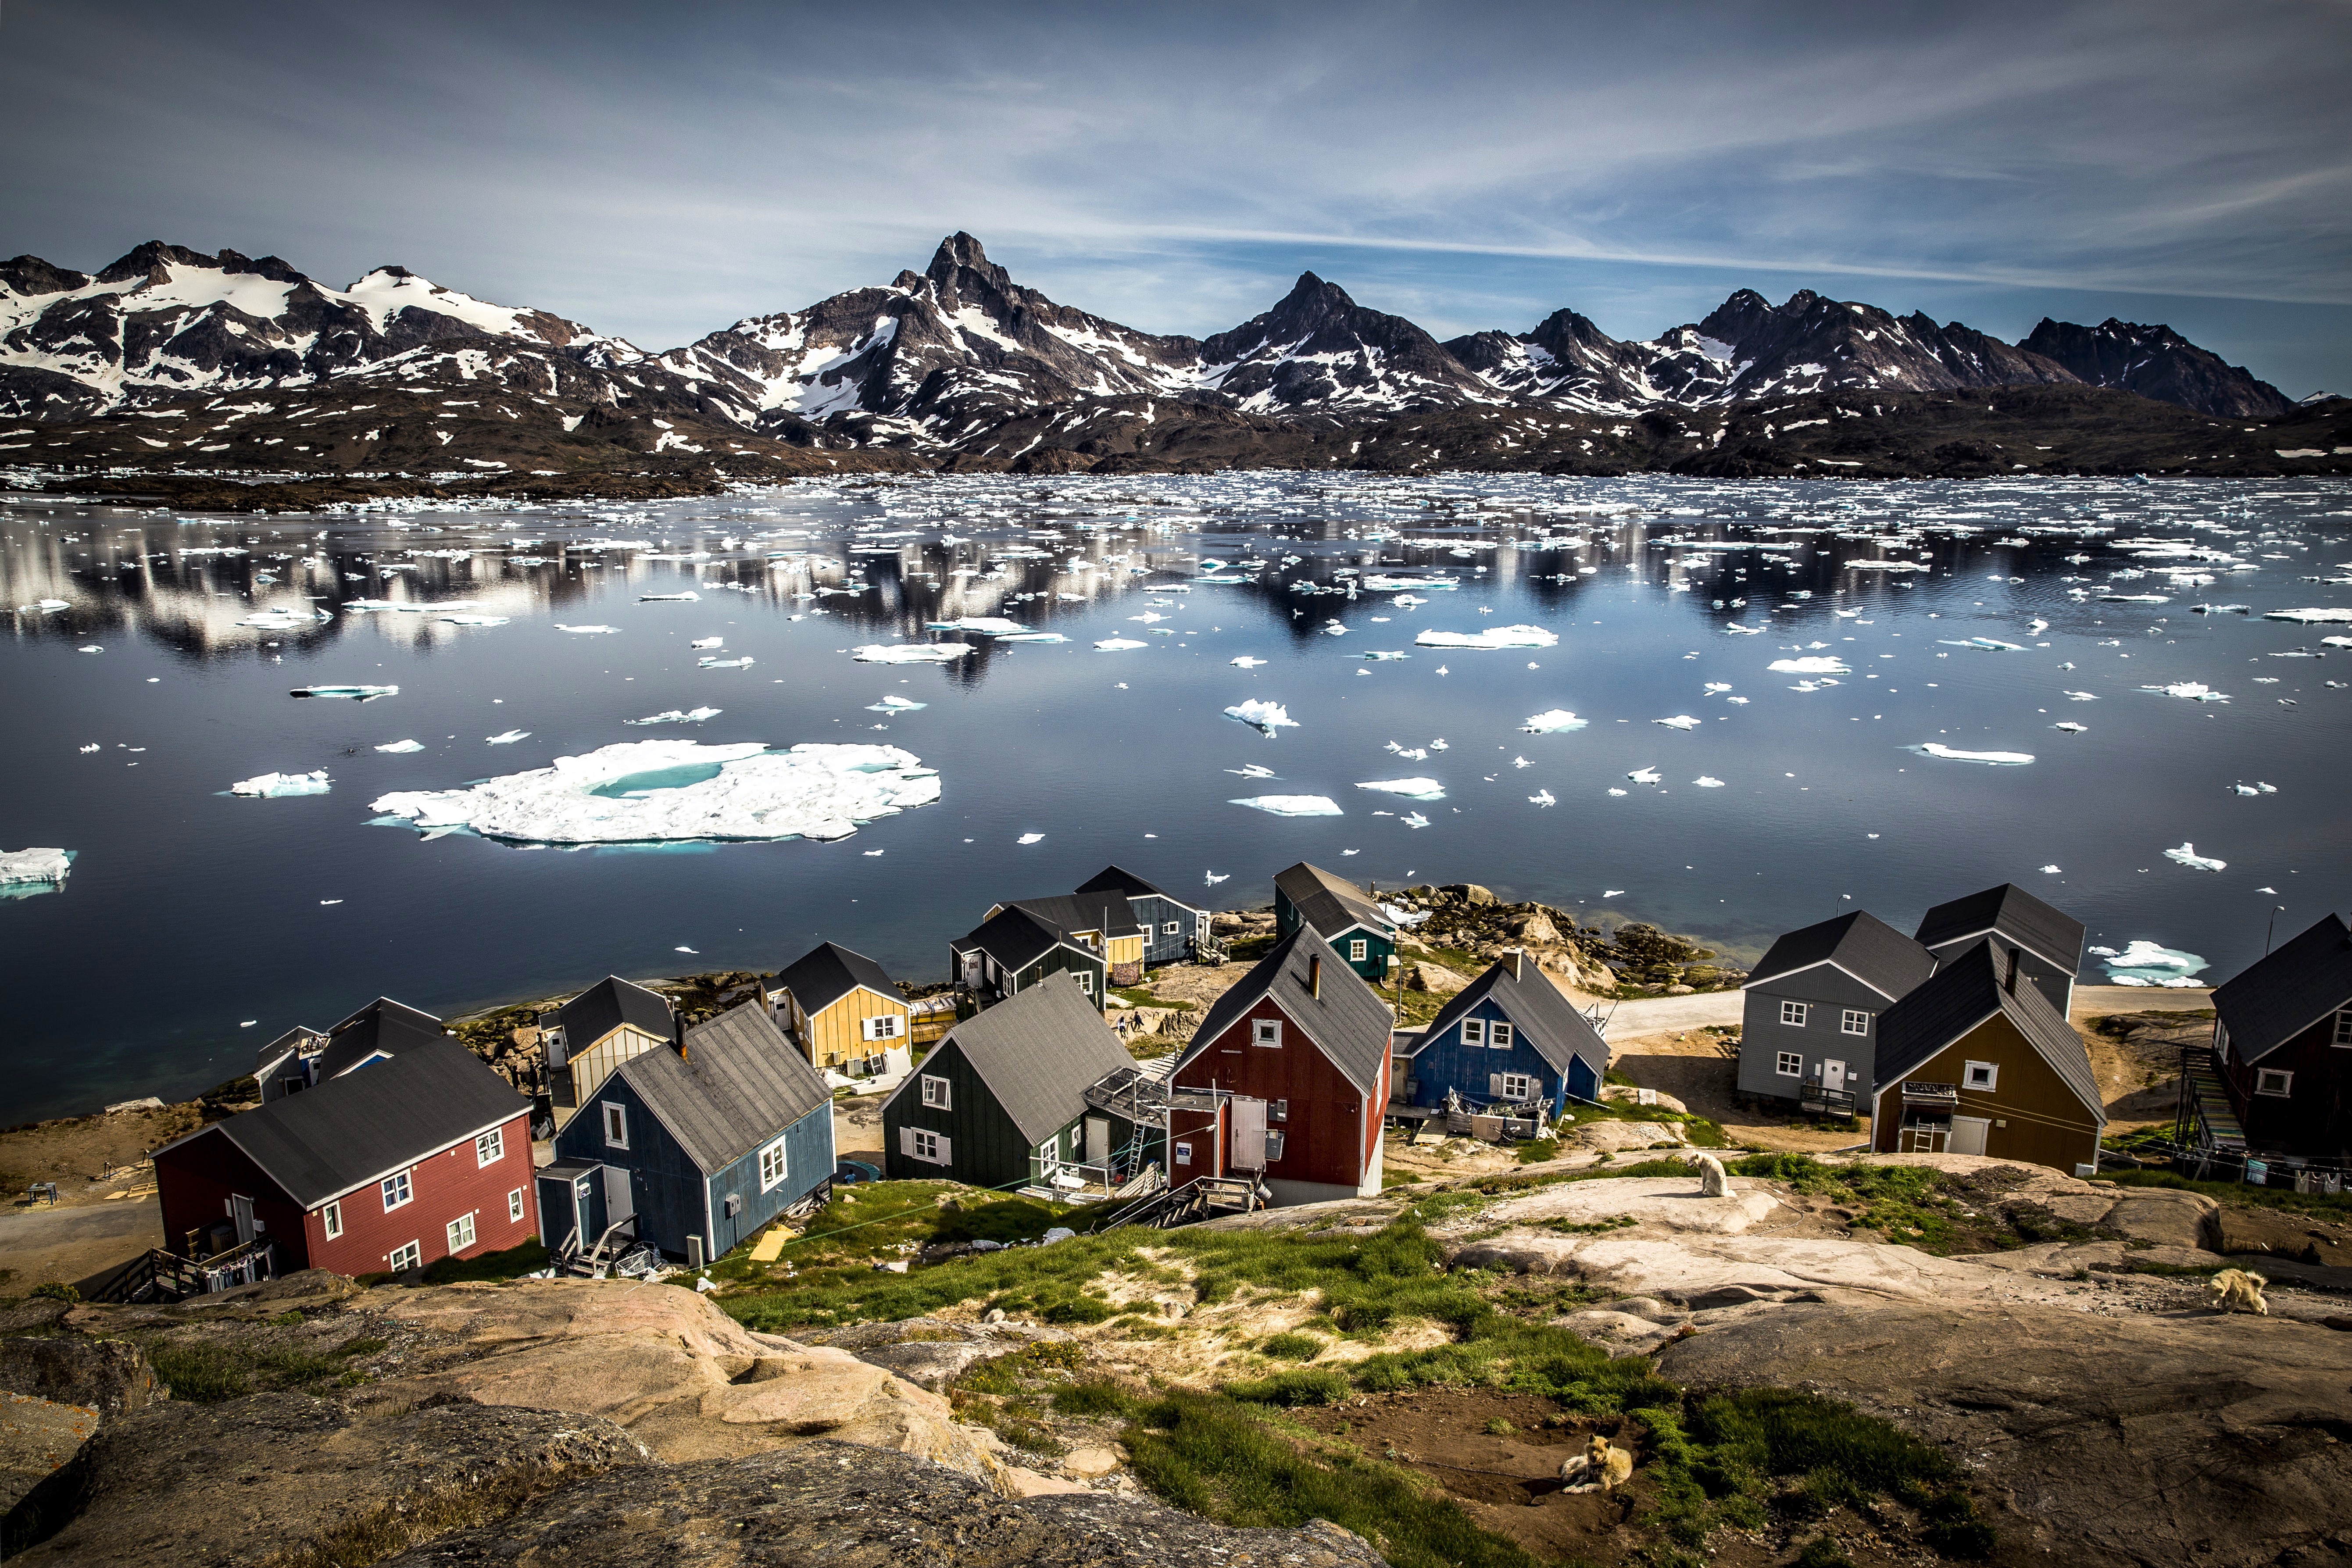 Houses in Tasiilaq at the edge of Kong Oskars Havn with the mountain Polheim in the background.